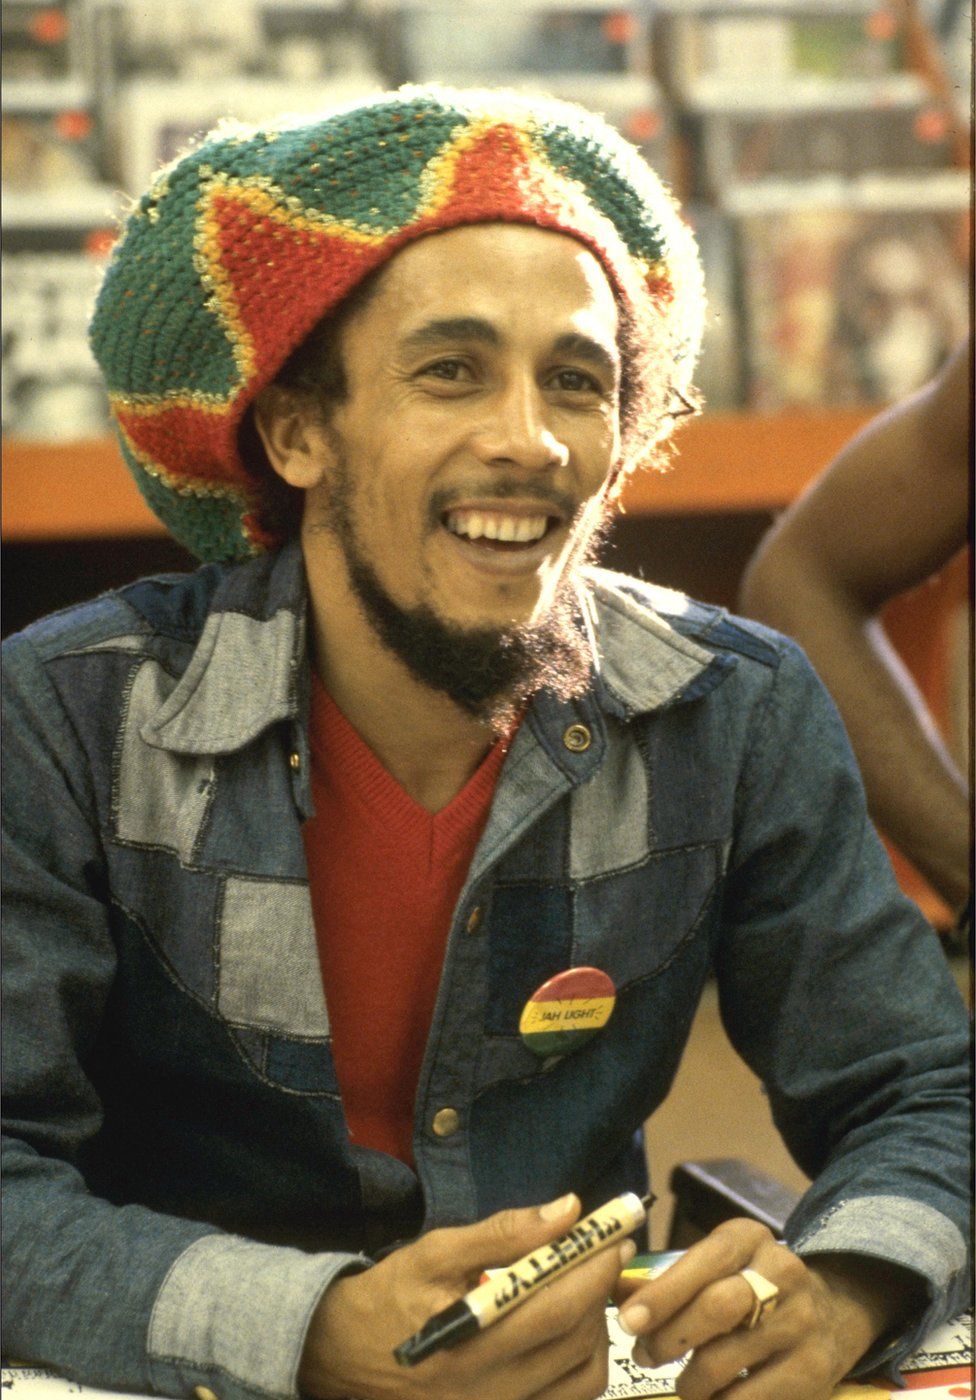 Bob Marley sits at a table holding a pen